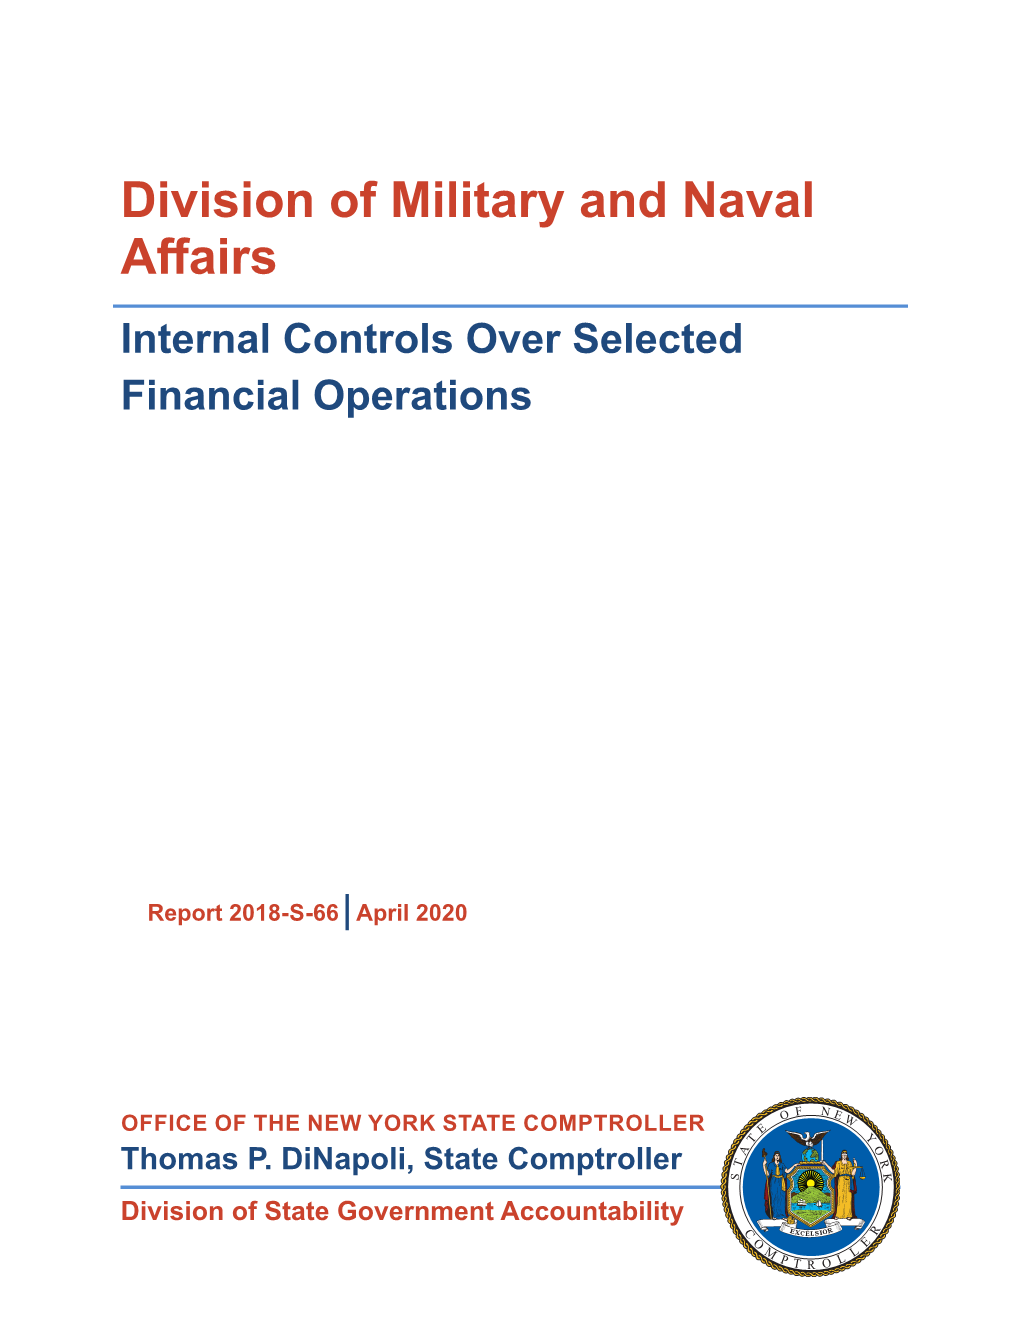 Division of Military and Naval Affairs Internal Controls Over Selected Financial Operations